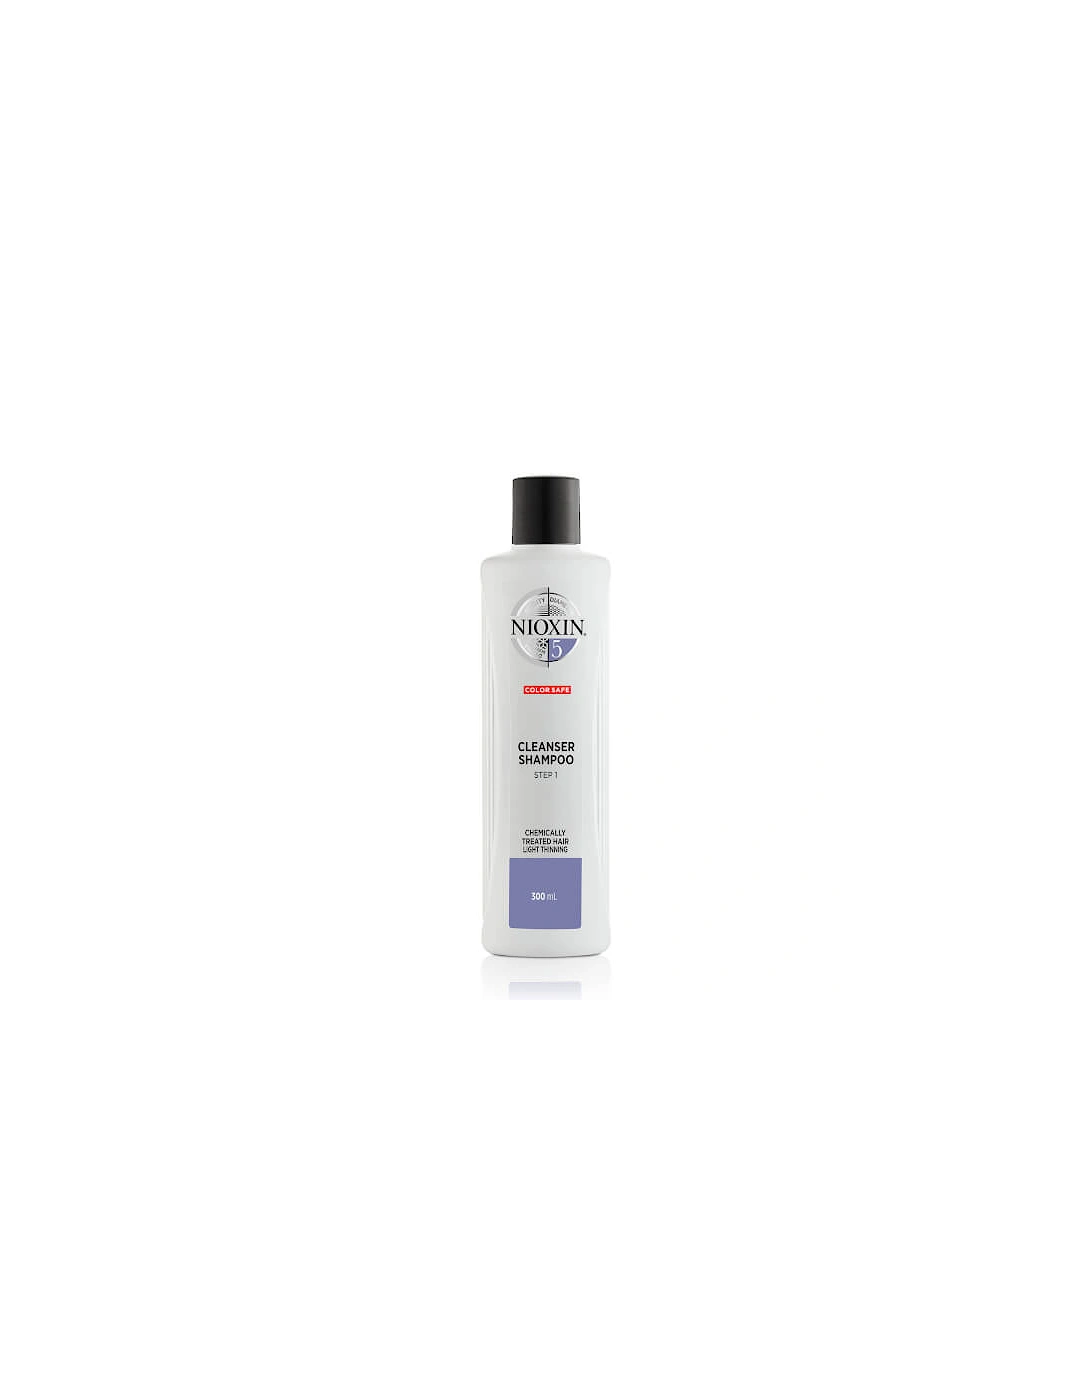 3-Part System 5 Cleanser Shampoo for Chemically Treated Hair with Light Thinning 300ml - NIOXIN, 2 of 1